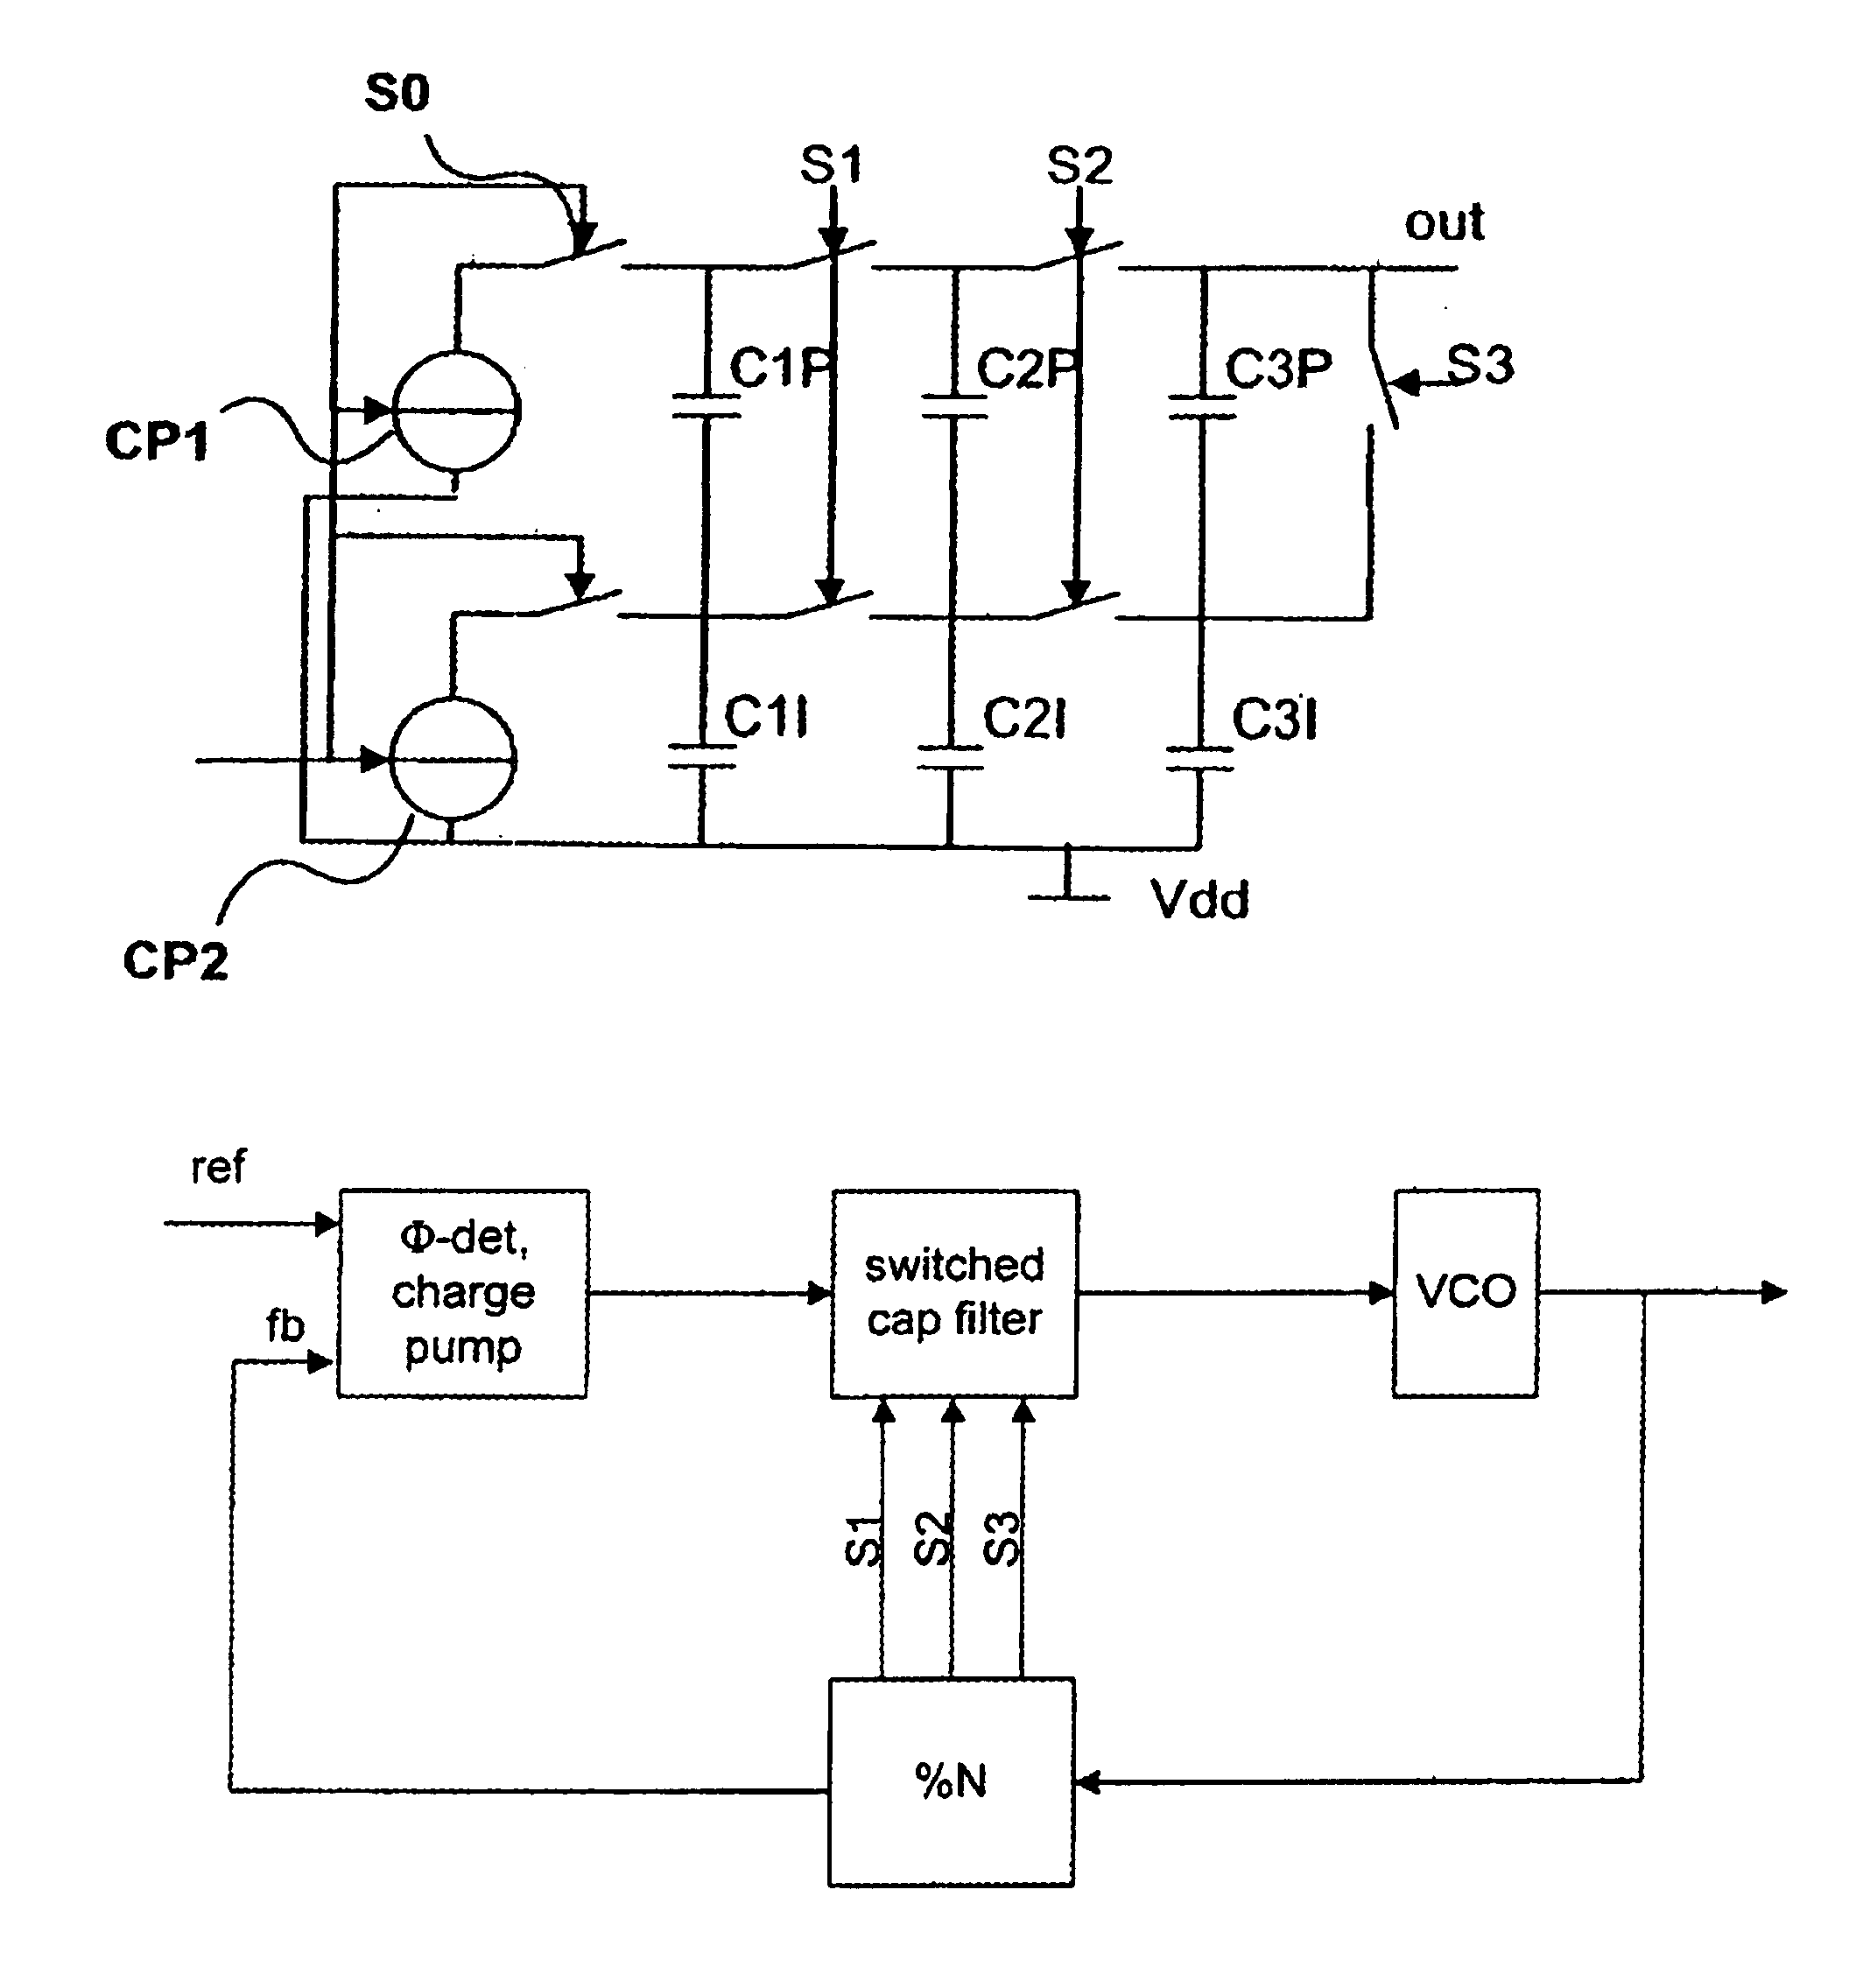 Analog PLL with switched capacitor resampling filter